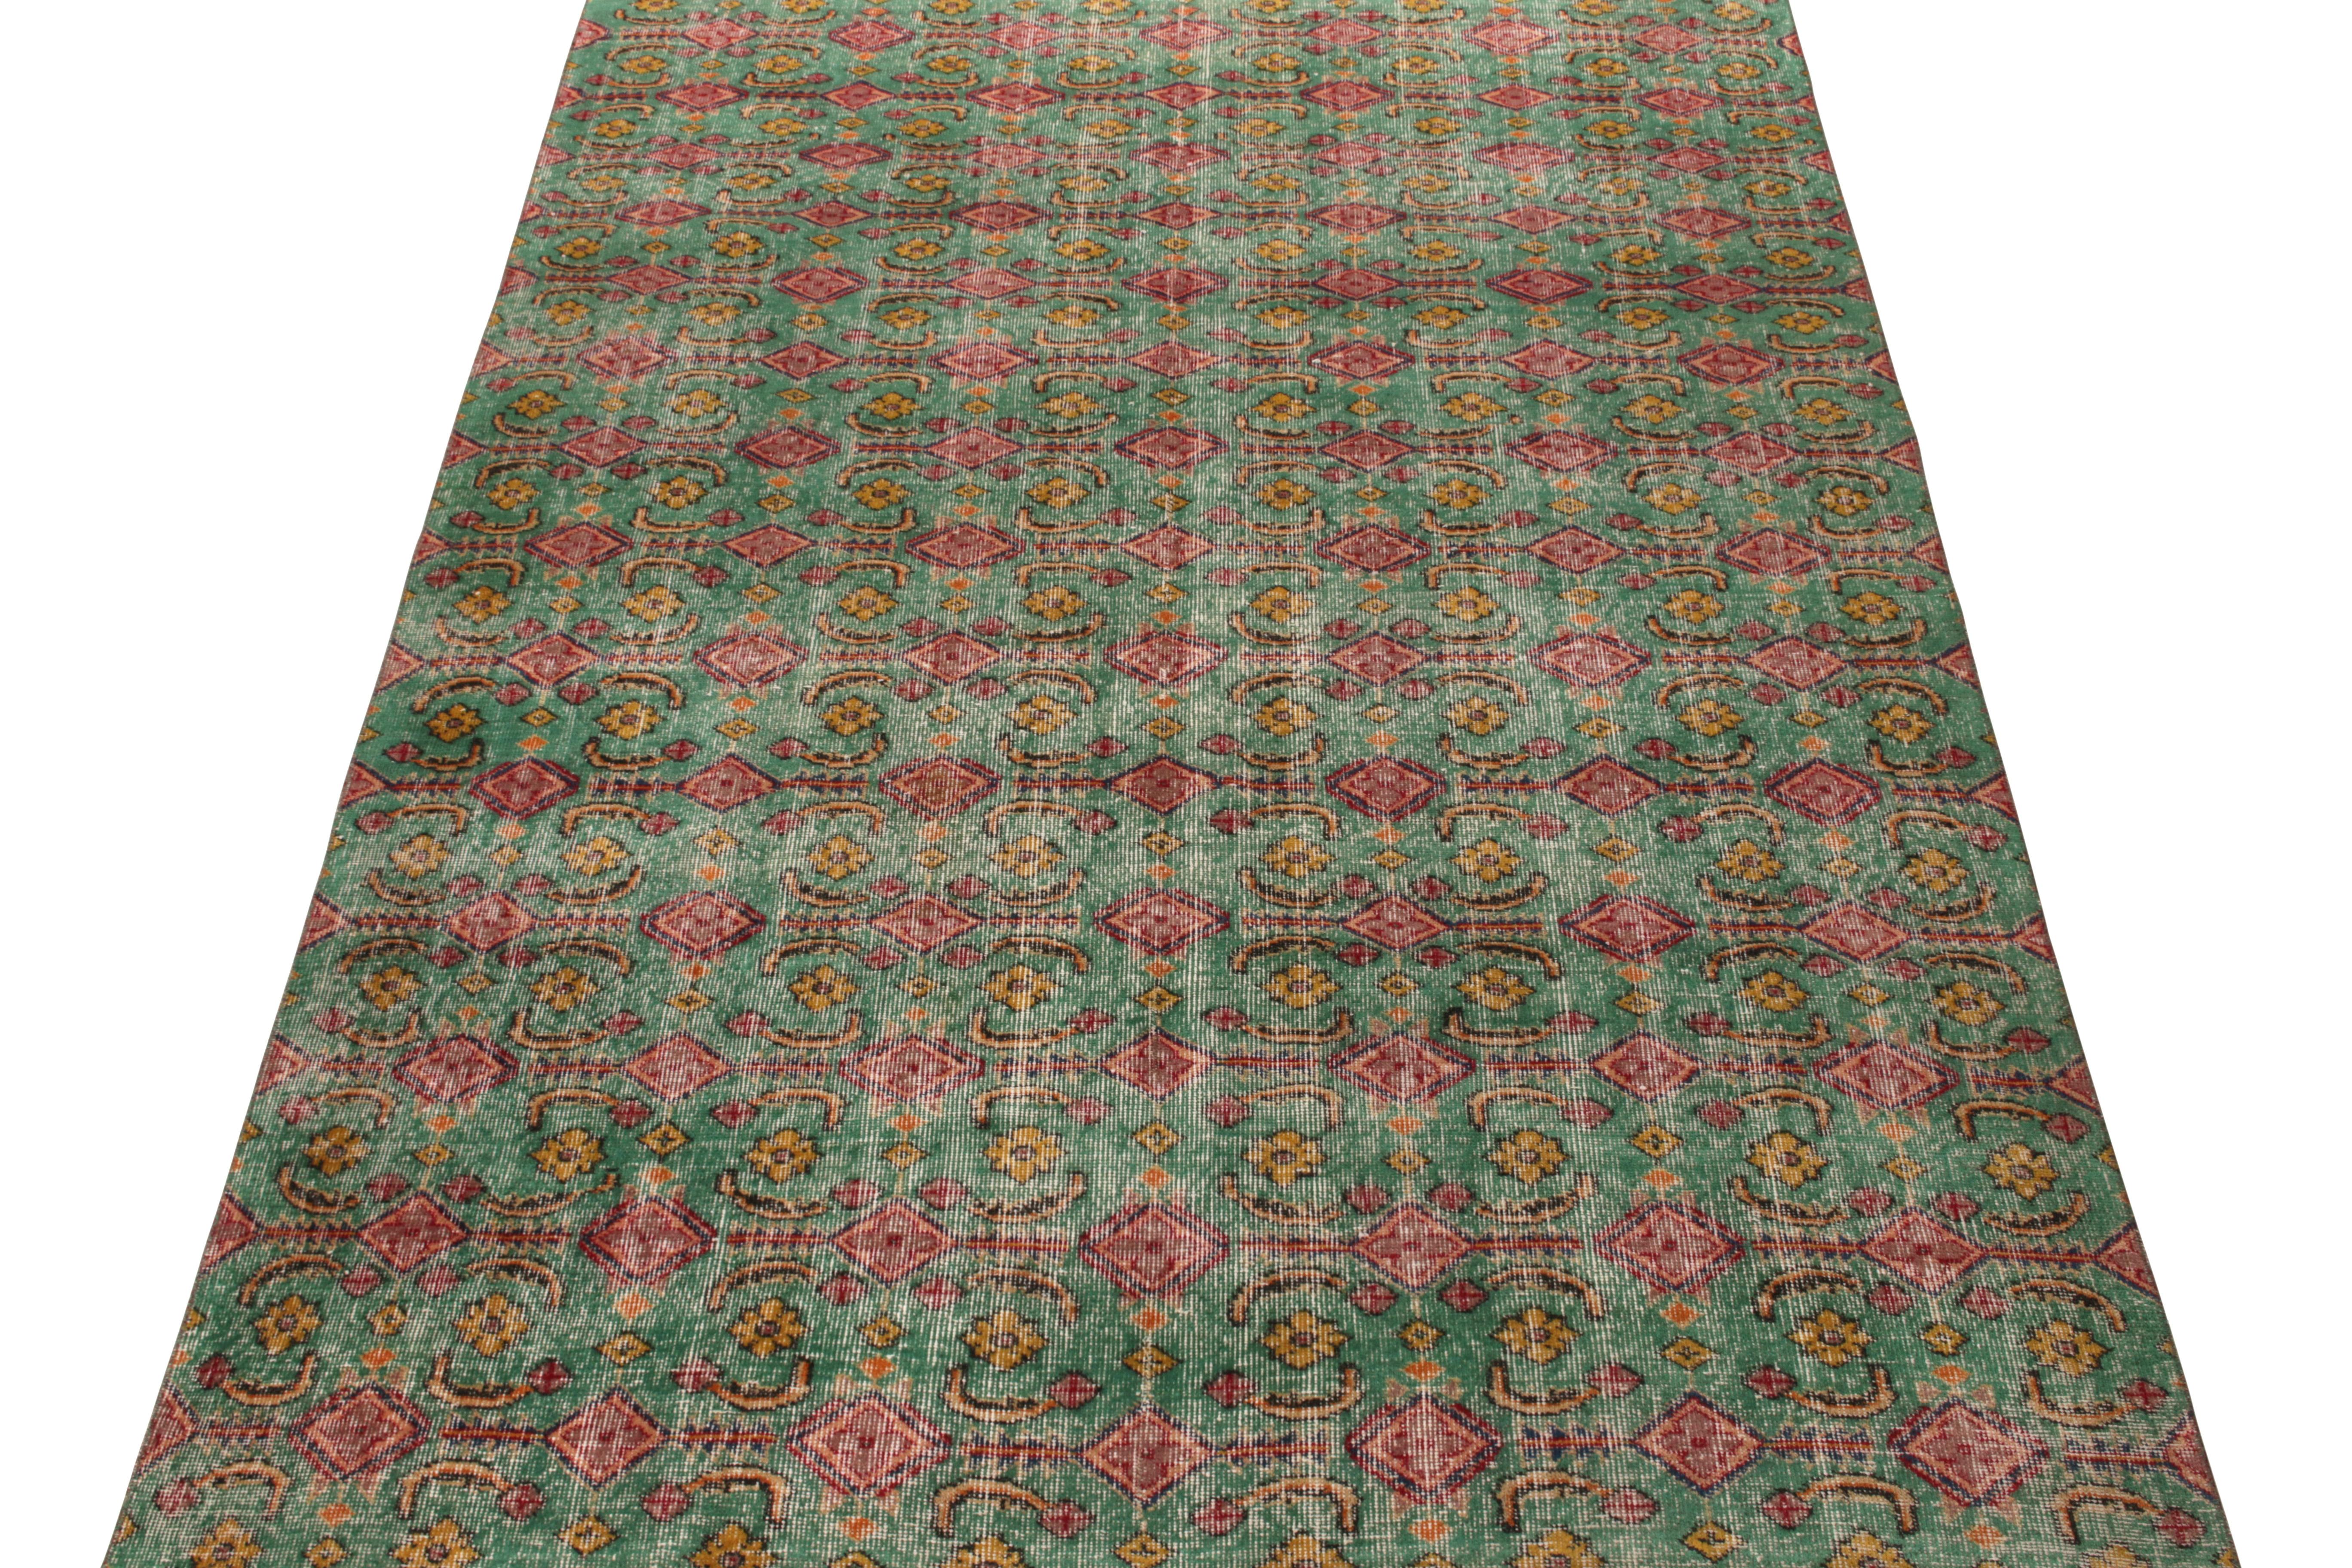 A vintage 6x9 distressed Art Deco rug, hand-knotted in wool circa 1960-1970. Joining Rug & Kilim’s Mid-Century Pasha Collection, commemorating a renowned Turkish multidisciplinary artist of the period known for these low-sheared pile, distressed